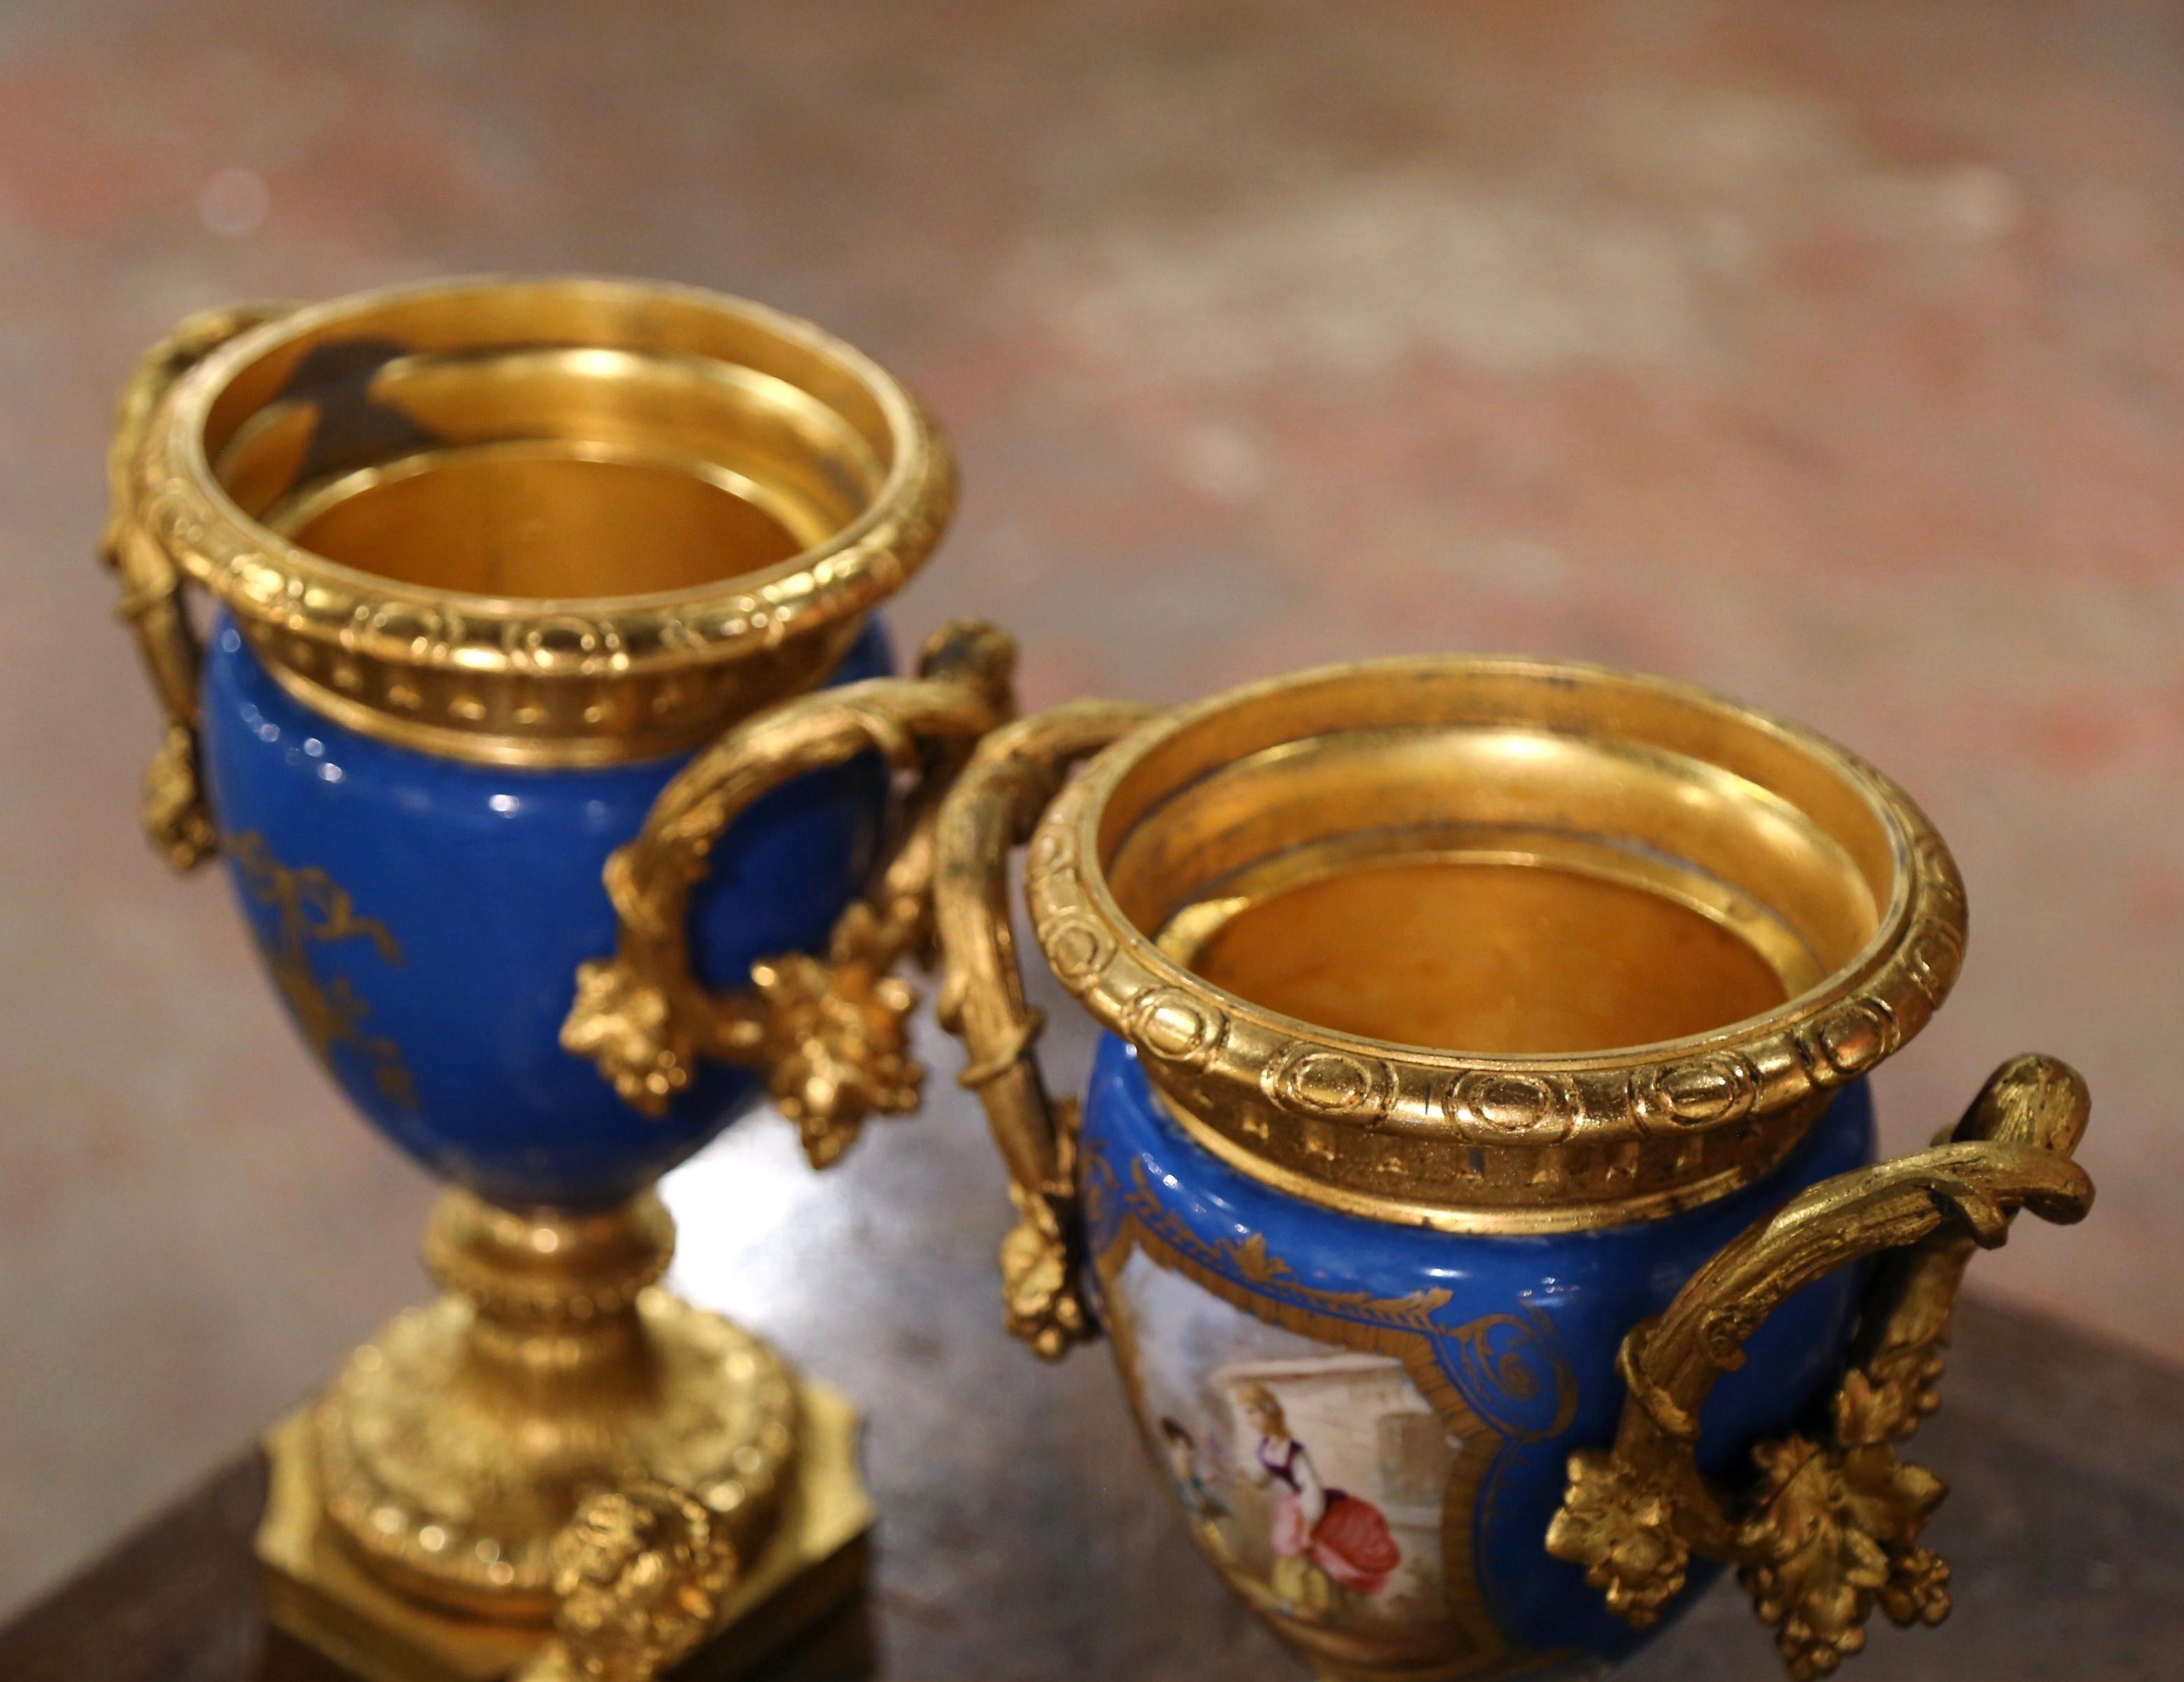 Pair of 19th Century French Blue Porcelain and Gilt Bronze Sèvres Urns Vases For Sale 9